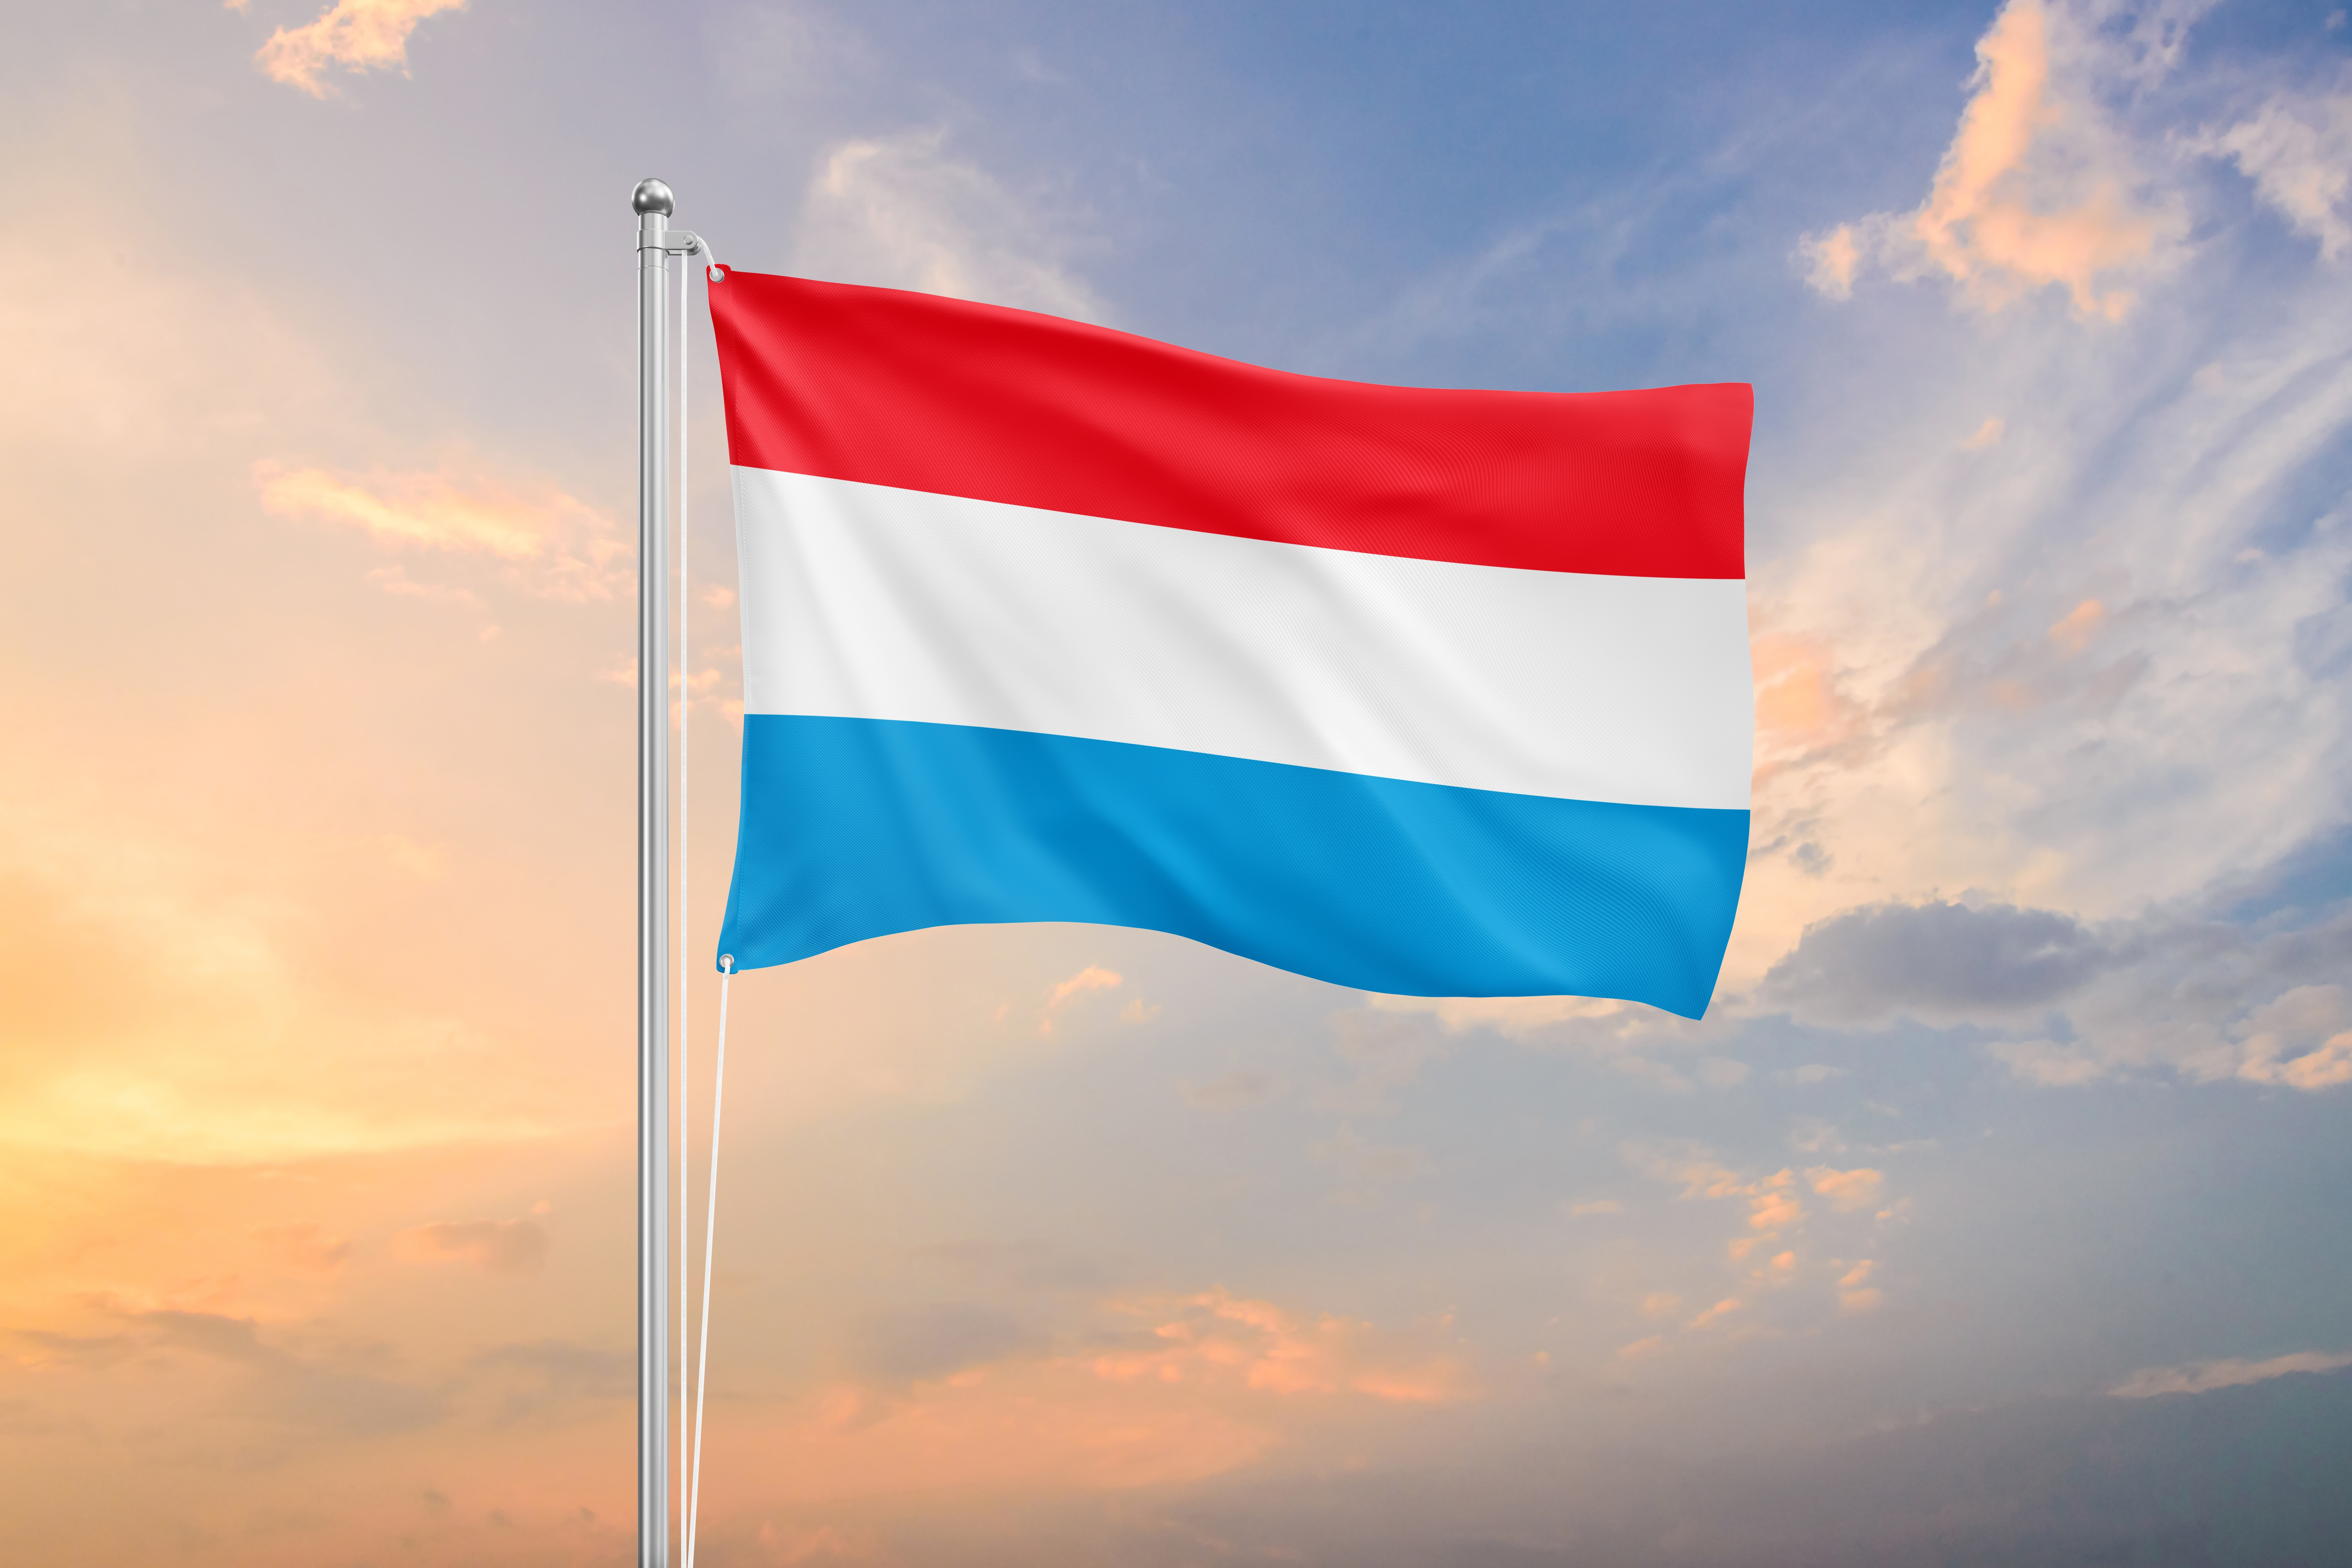 The flag symbolizes the citizenship of Luxembourg